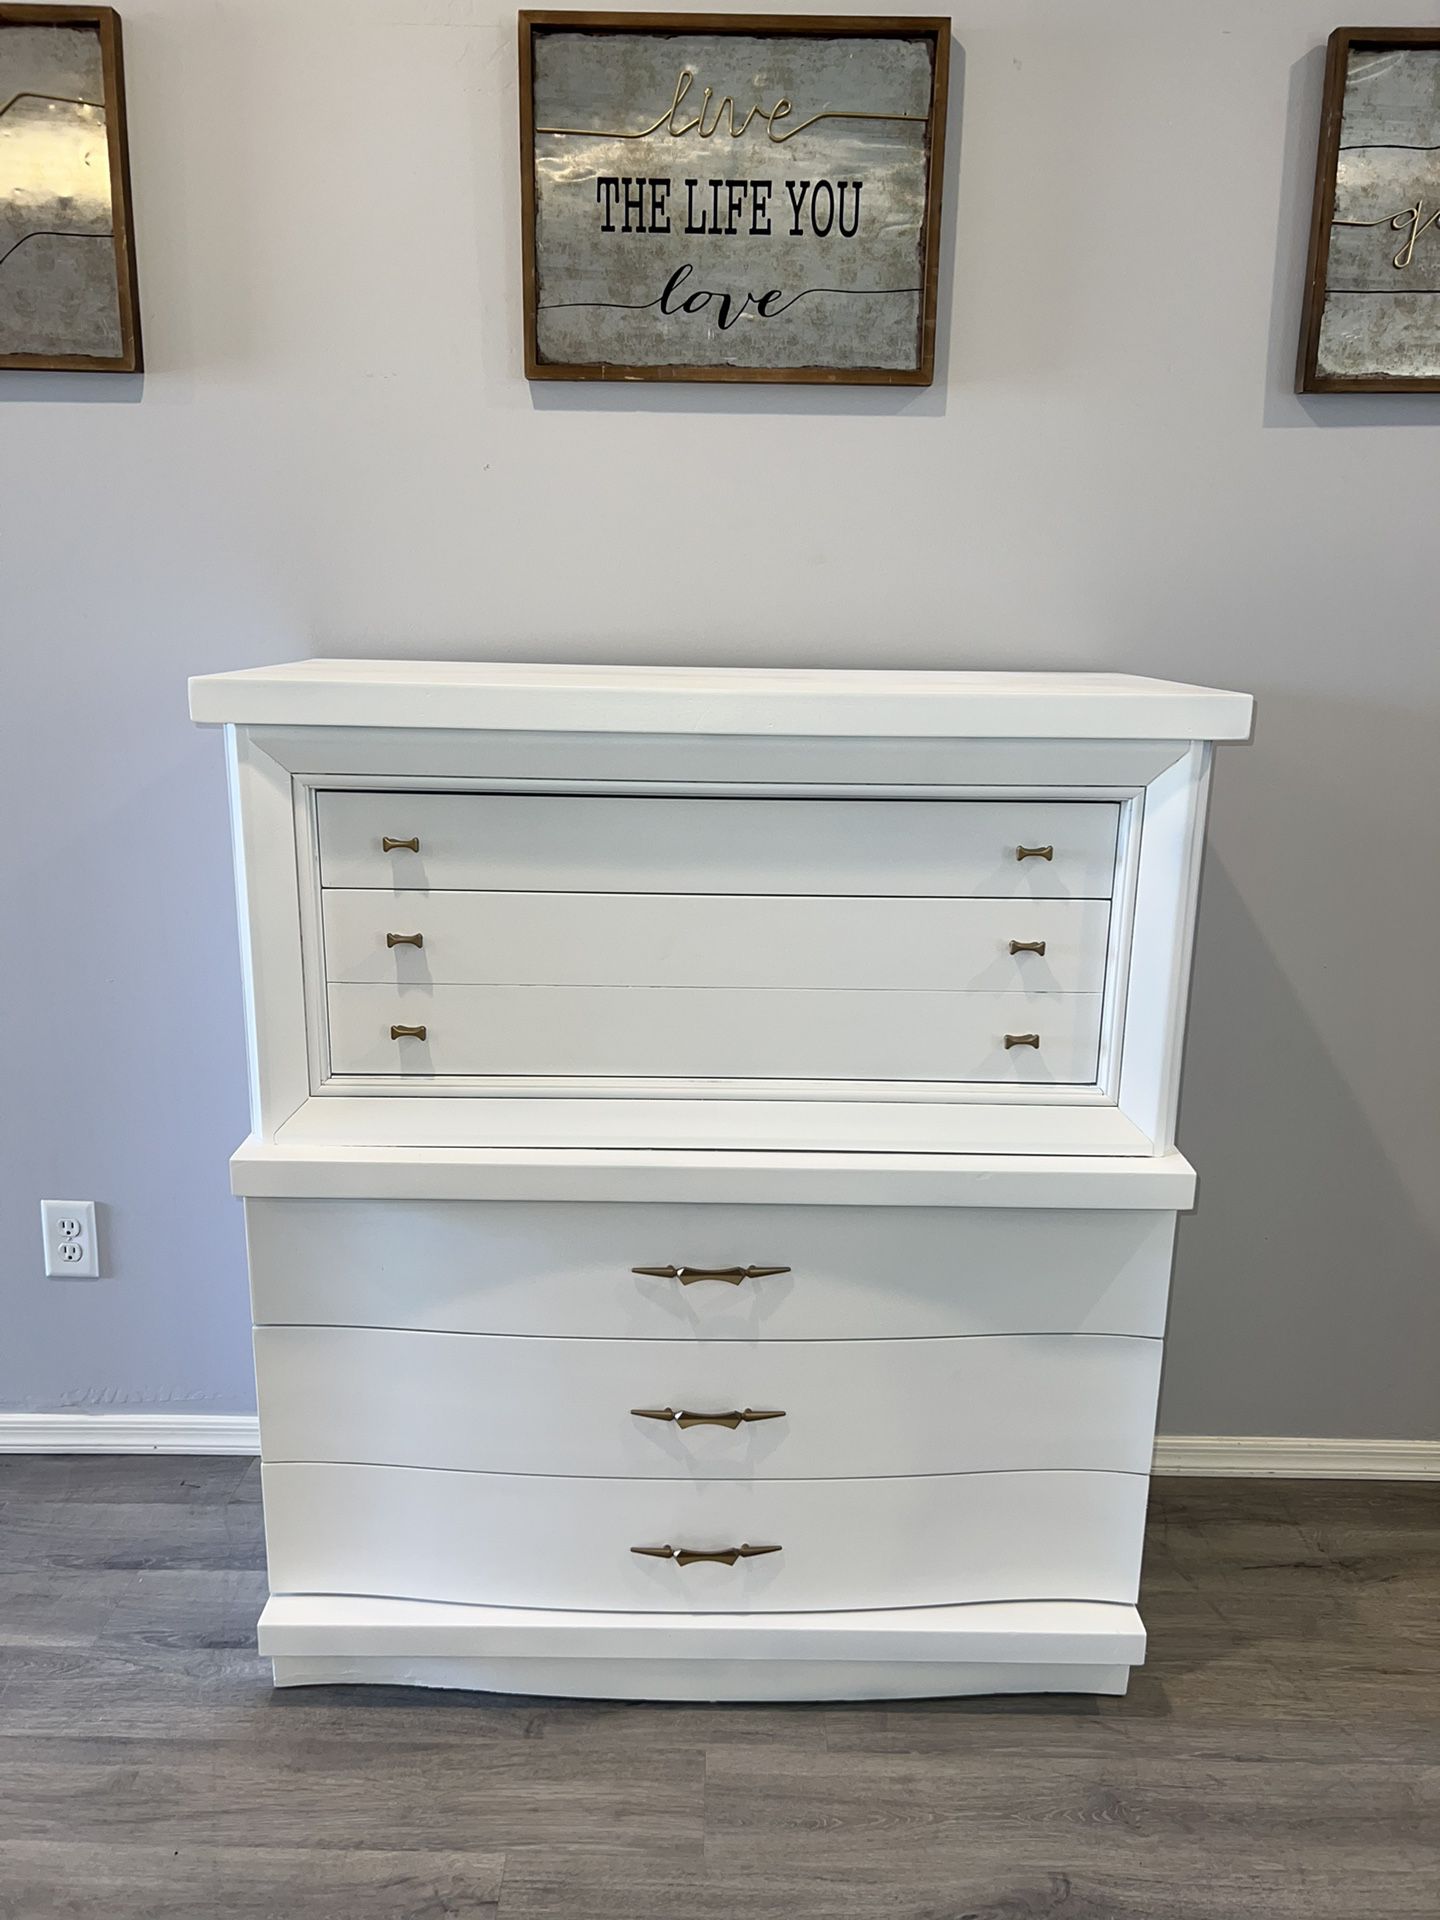 $145 firm - 5 drawer Tall dresser / chest of drawers - delivery available for a fee